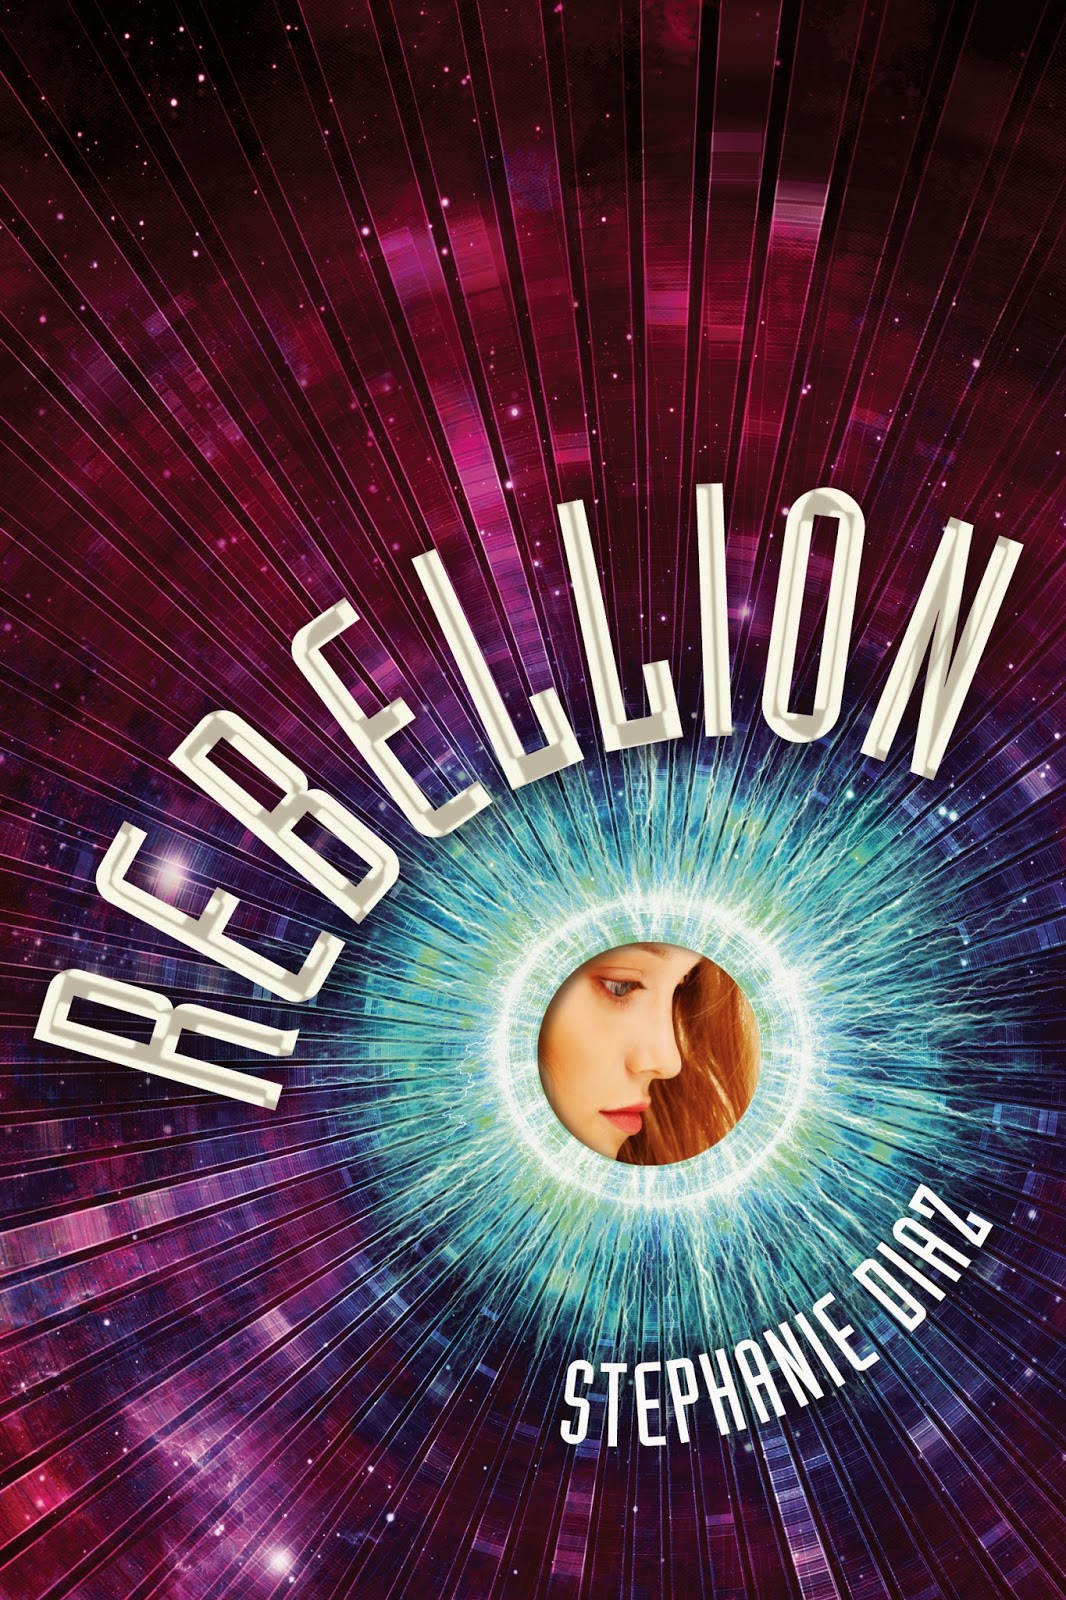 Guest Post: Stephanie Diaz on Writing, Rituals, and Music- Rebellion Blog Tour